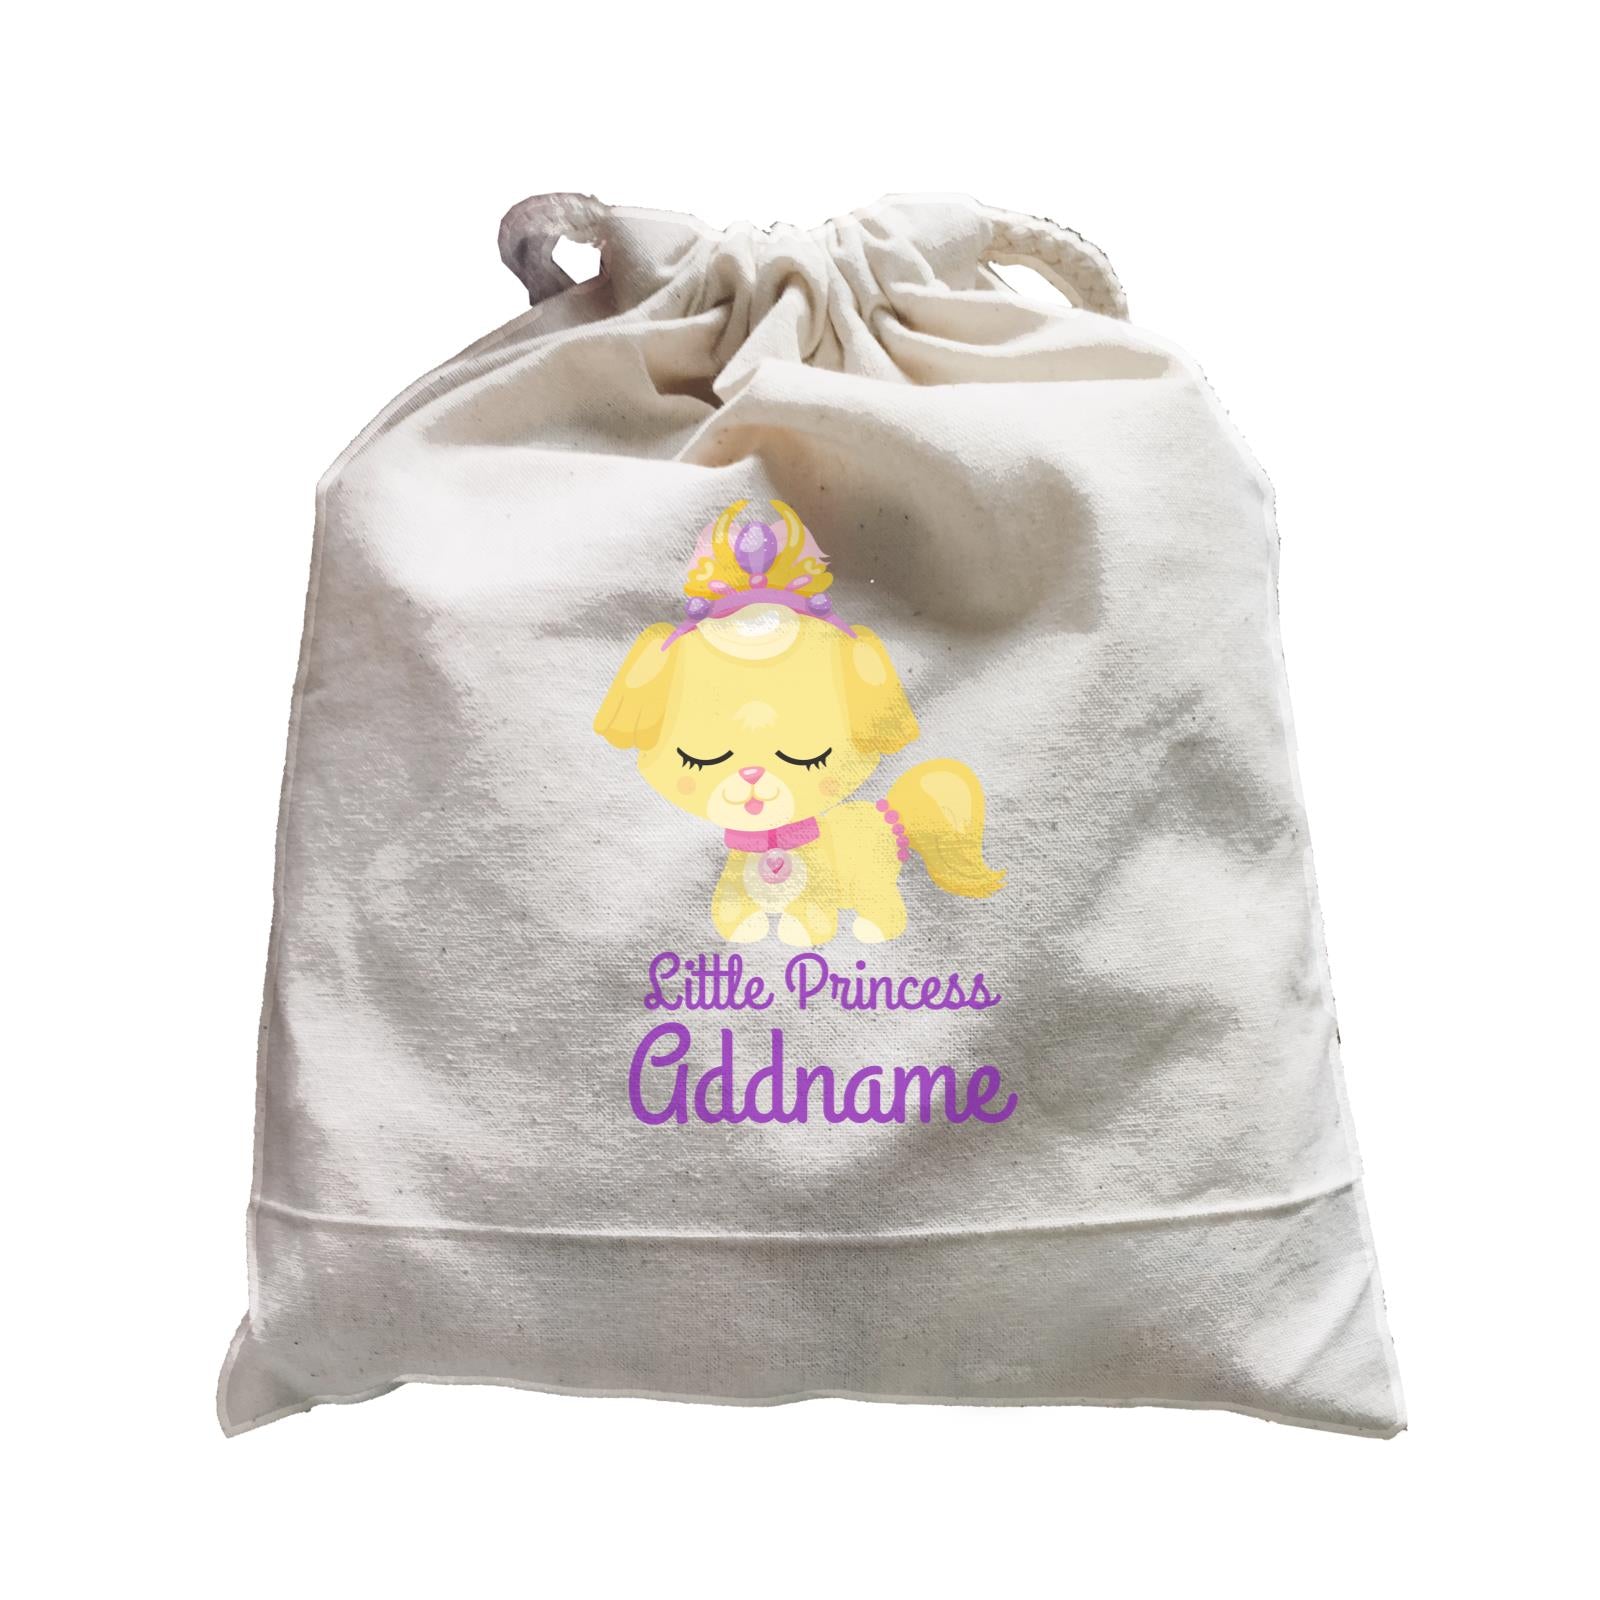 Little Princess Pets Yellow Dog with Crown Addname Satchel